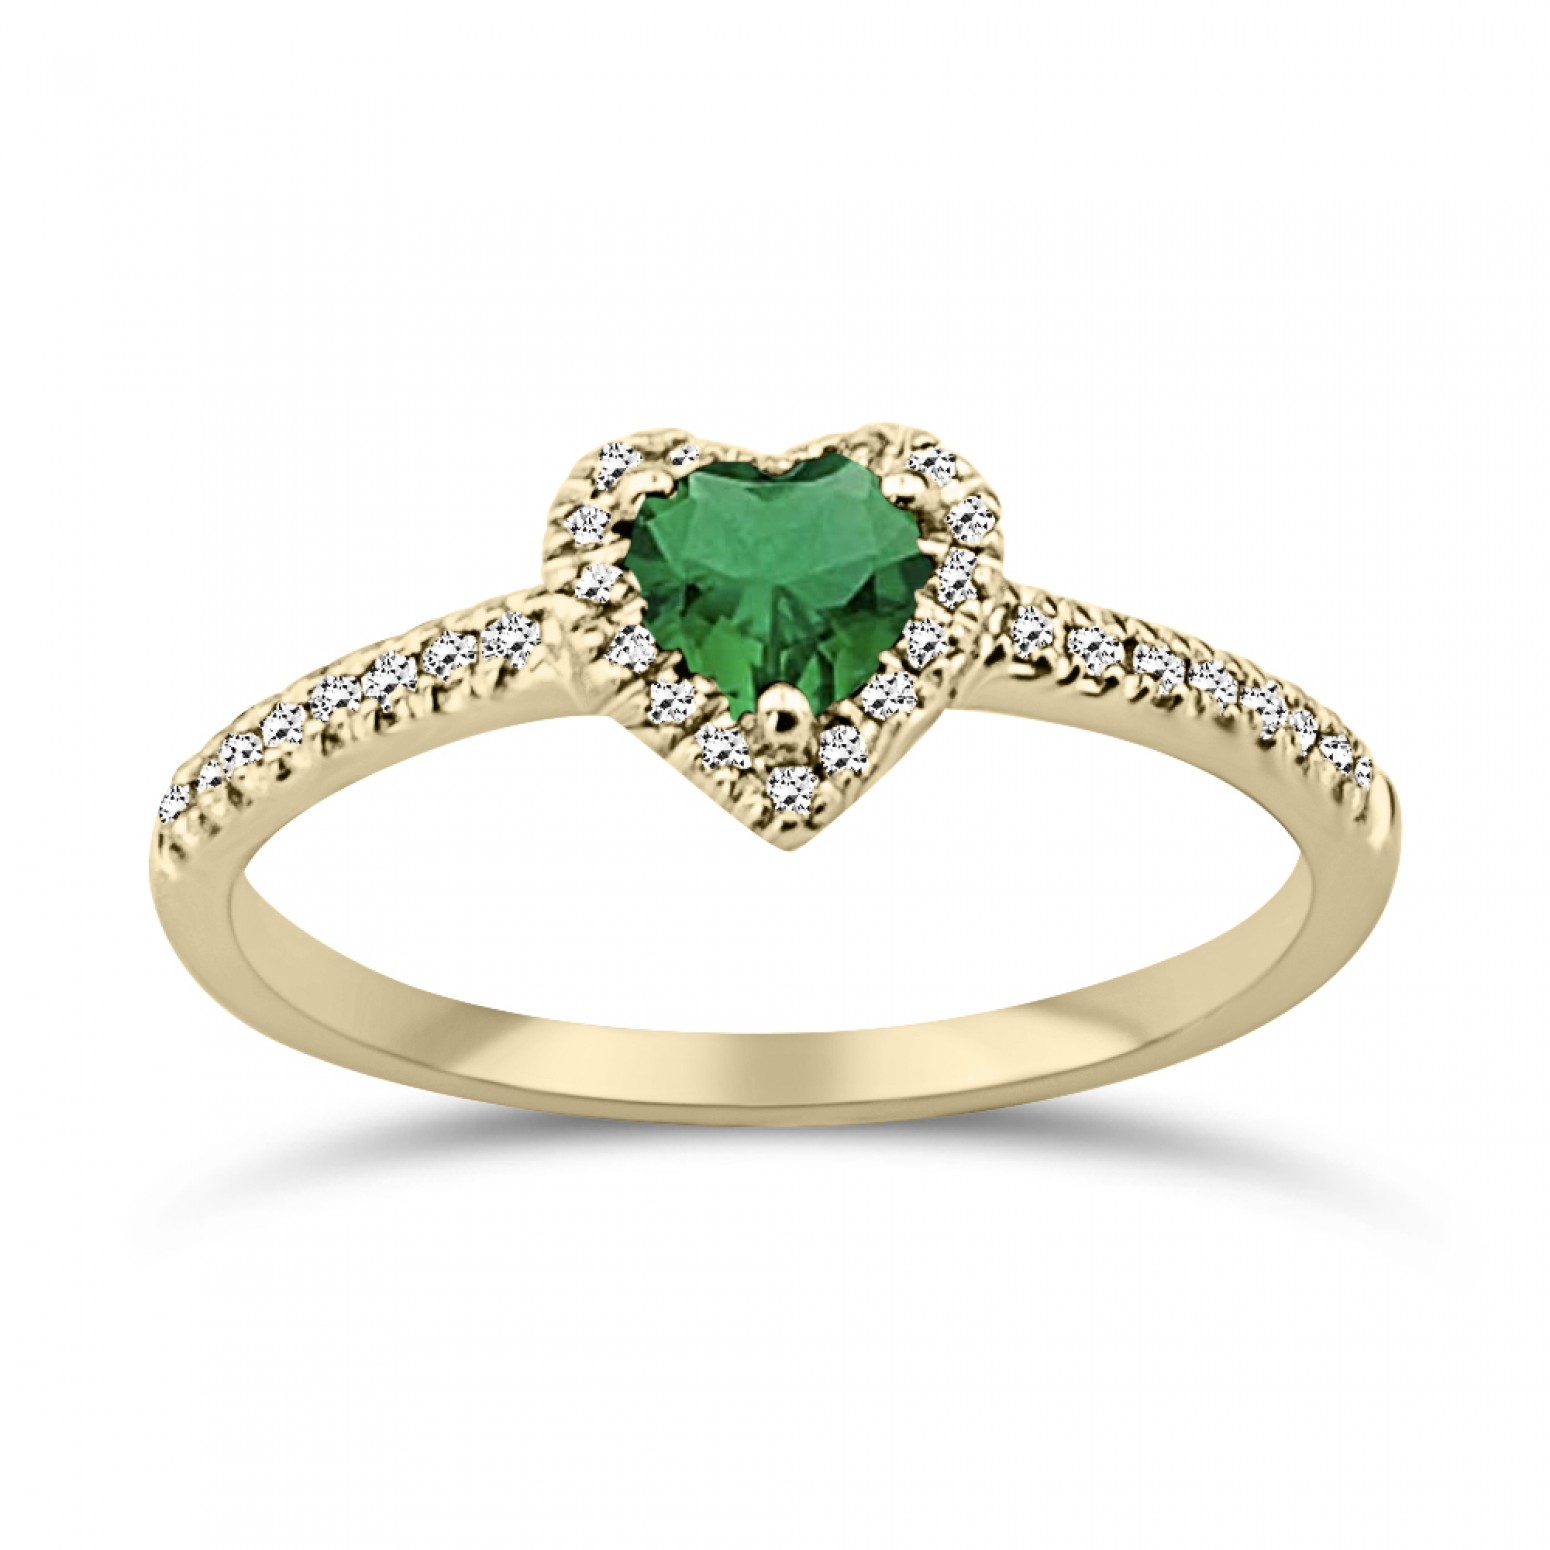 Solitaire heart ring 18K gold with emerald 0.40ct and diamonds VS1, Η da4011 ENGAGEMENT RINGS Κοσμηματα - chrilia.gr